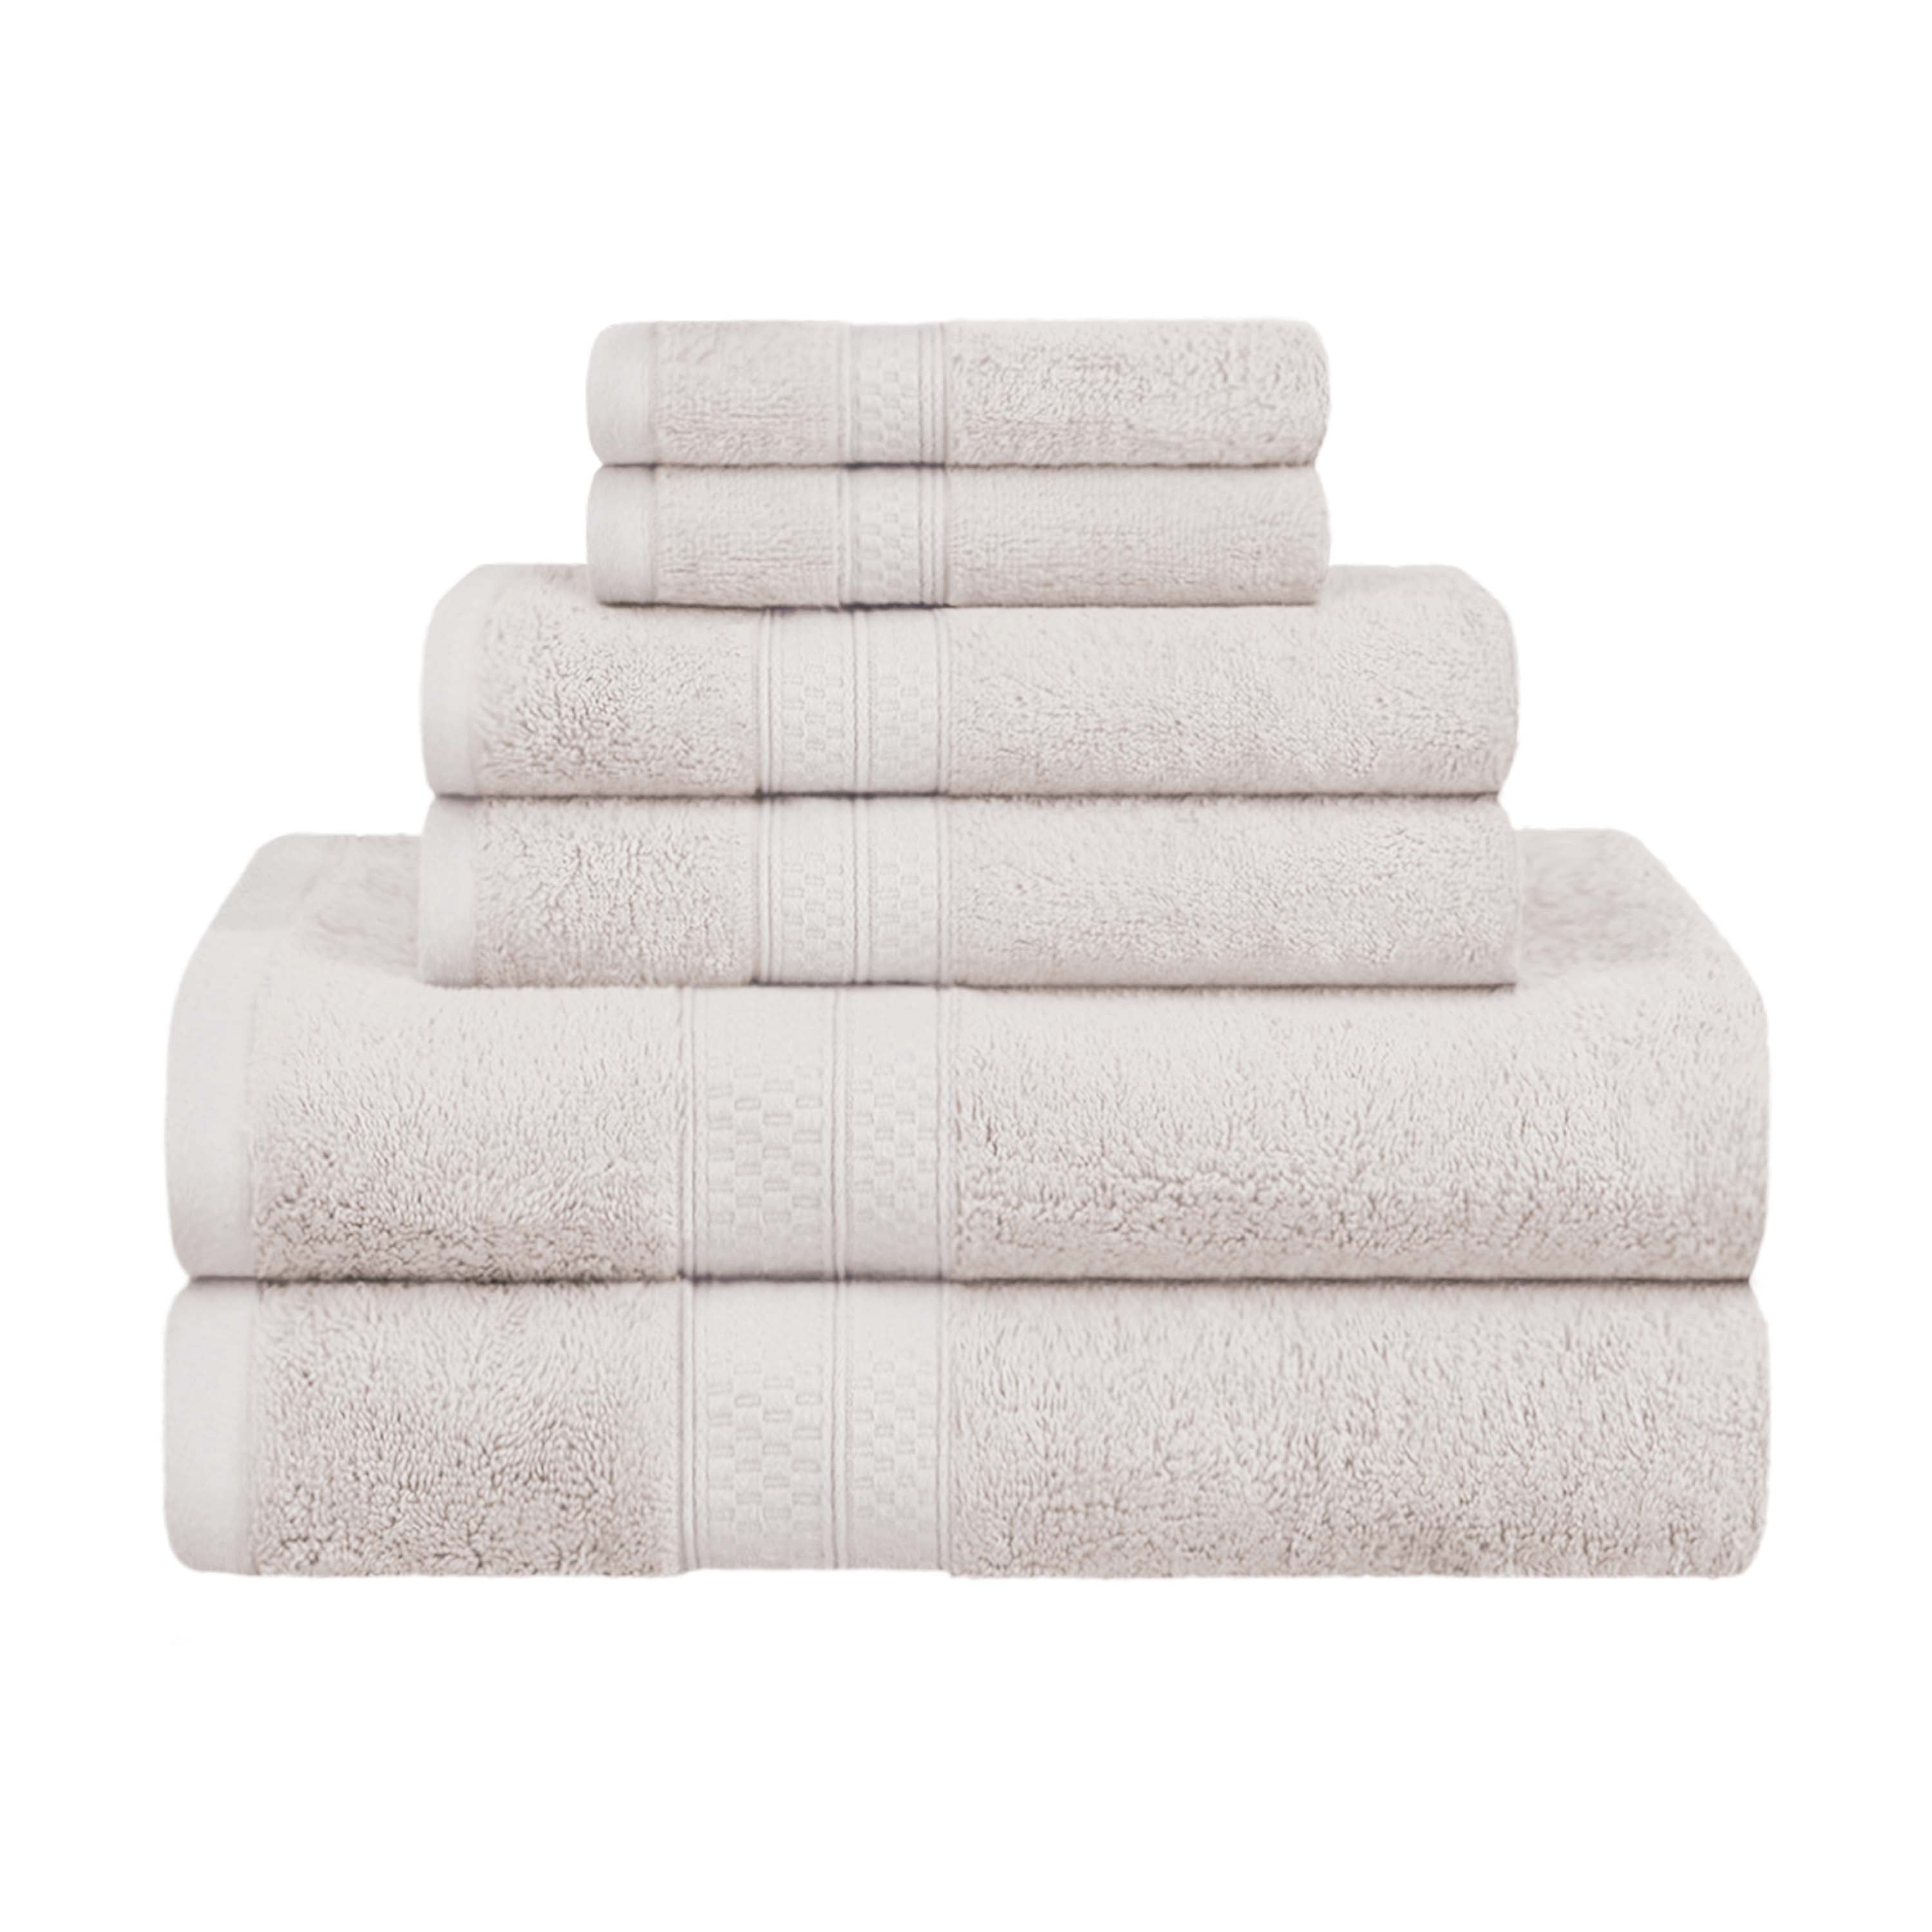 Cotton/Bamboo Open-Stock Bath Towel Collection - Natural - The Vermont Country Store